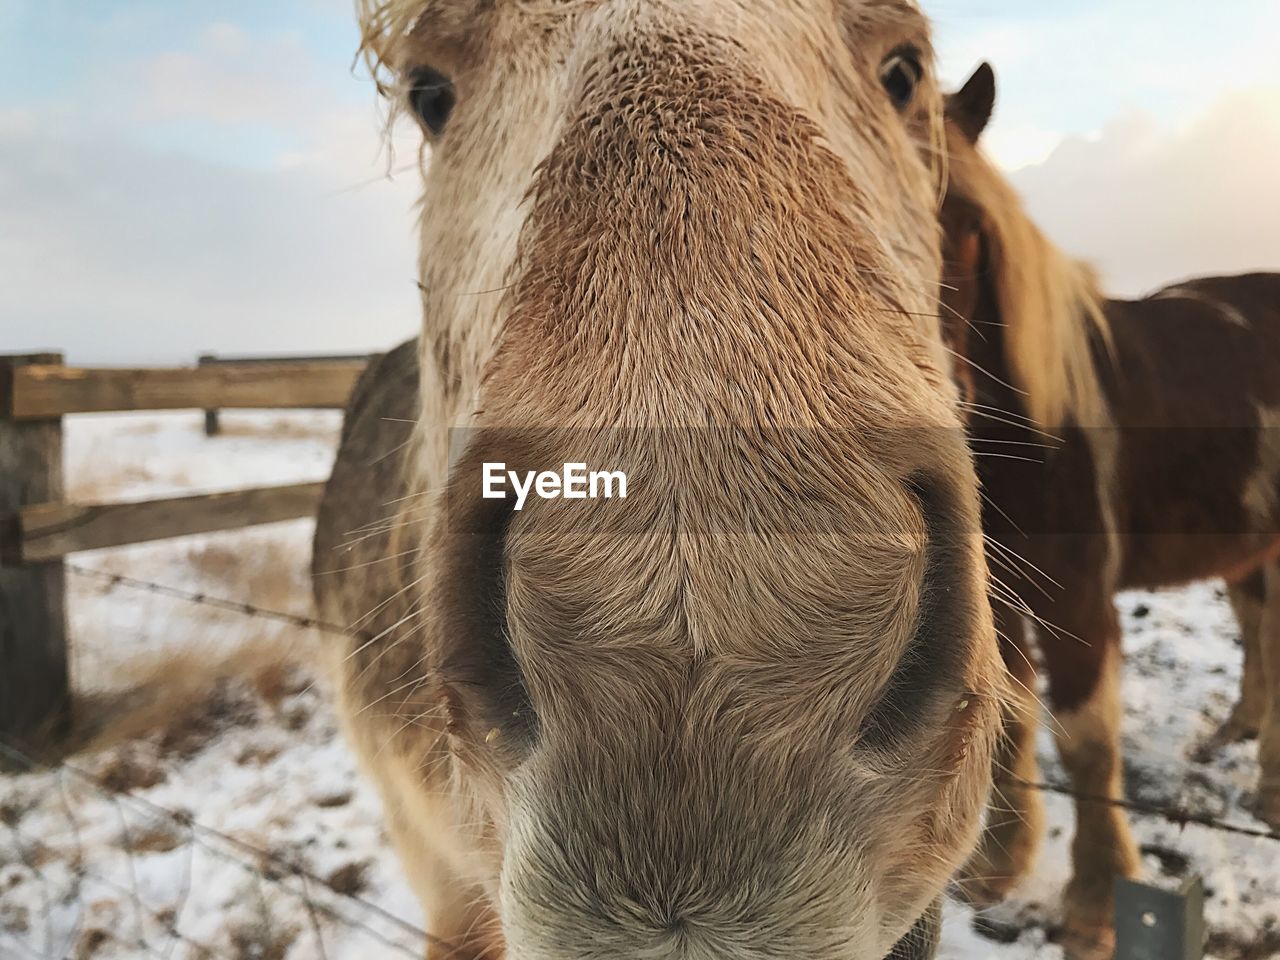 Close-up portrait of horse in winter